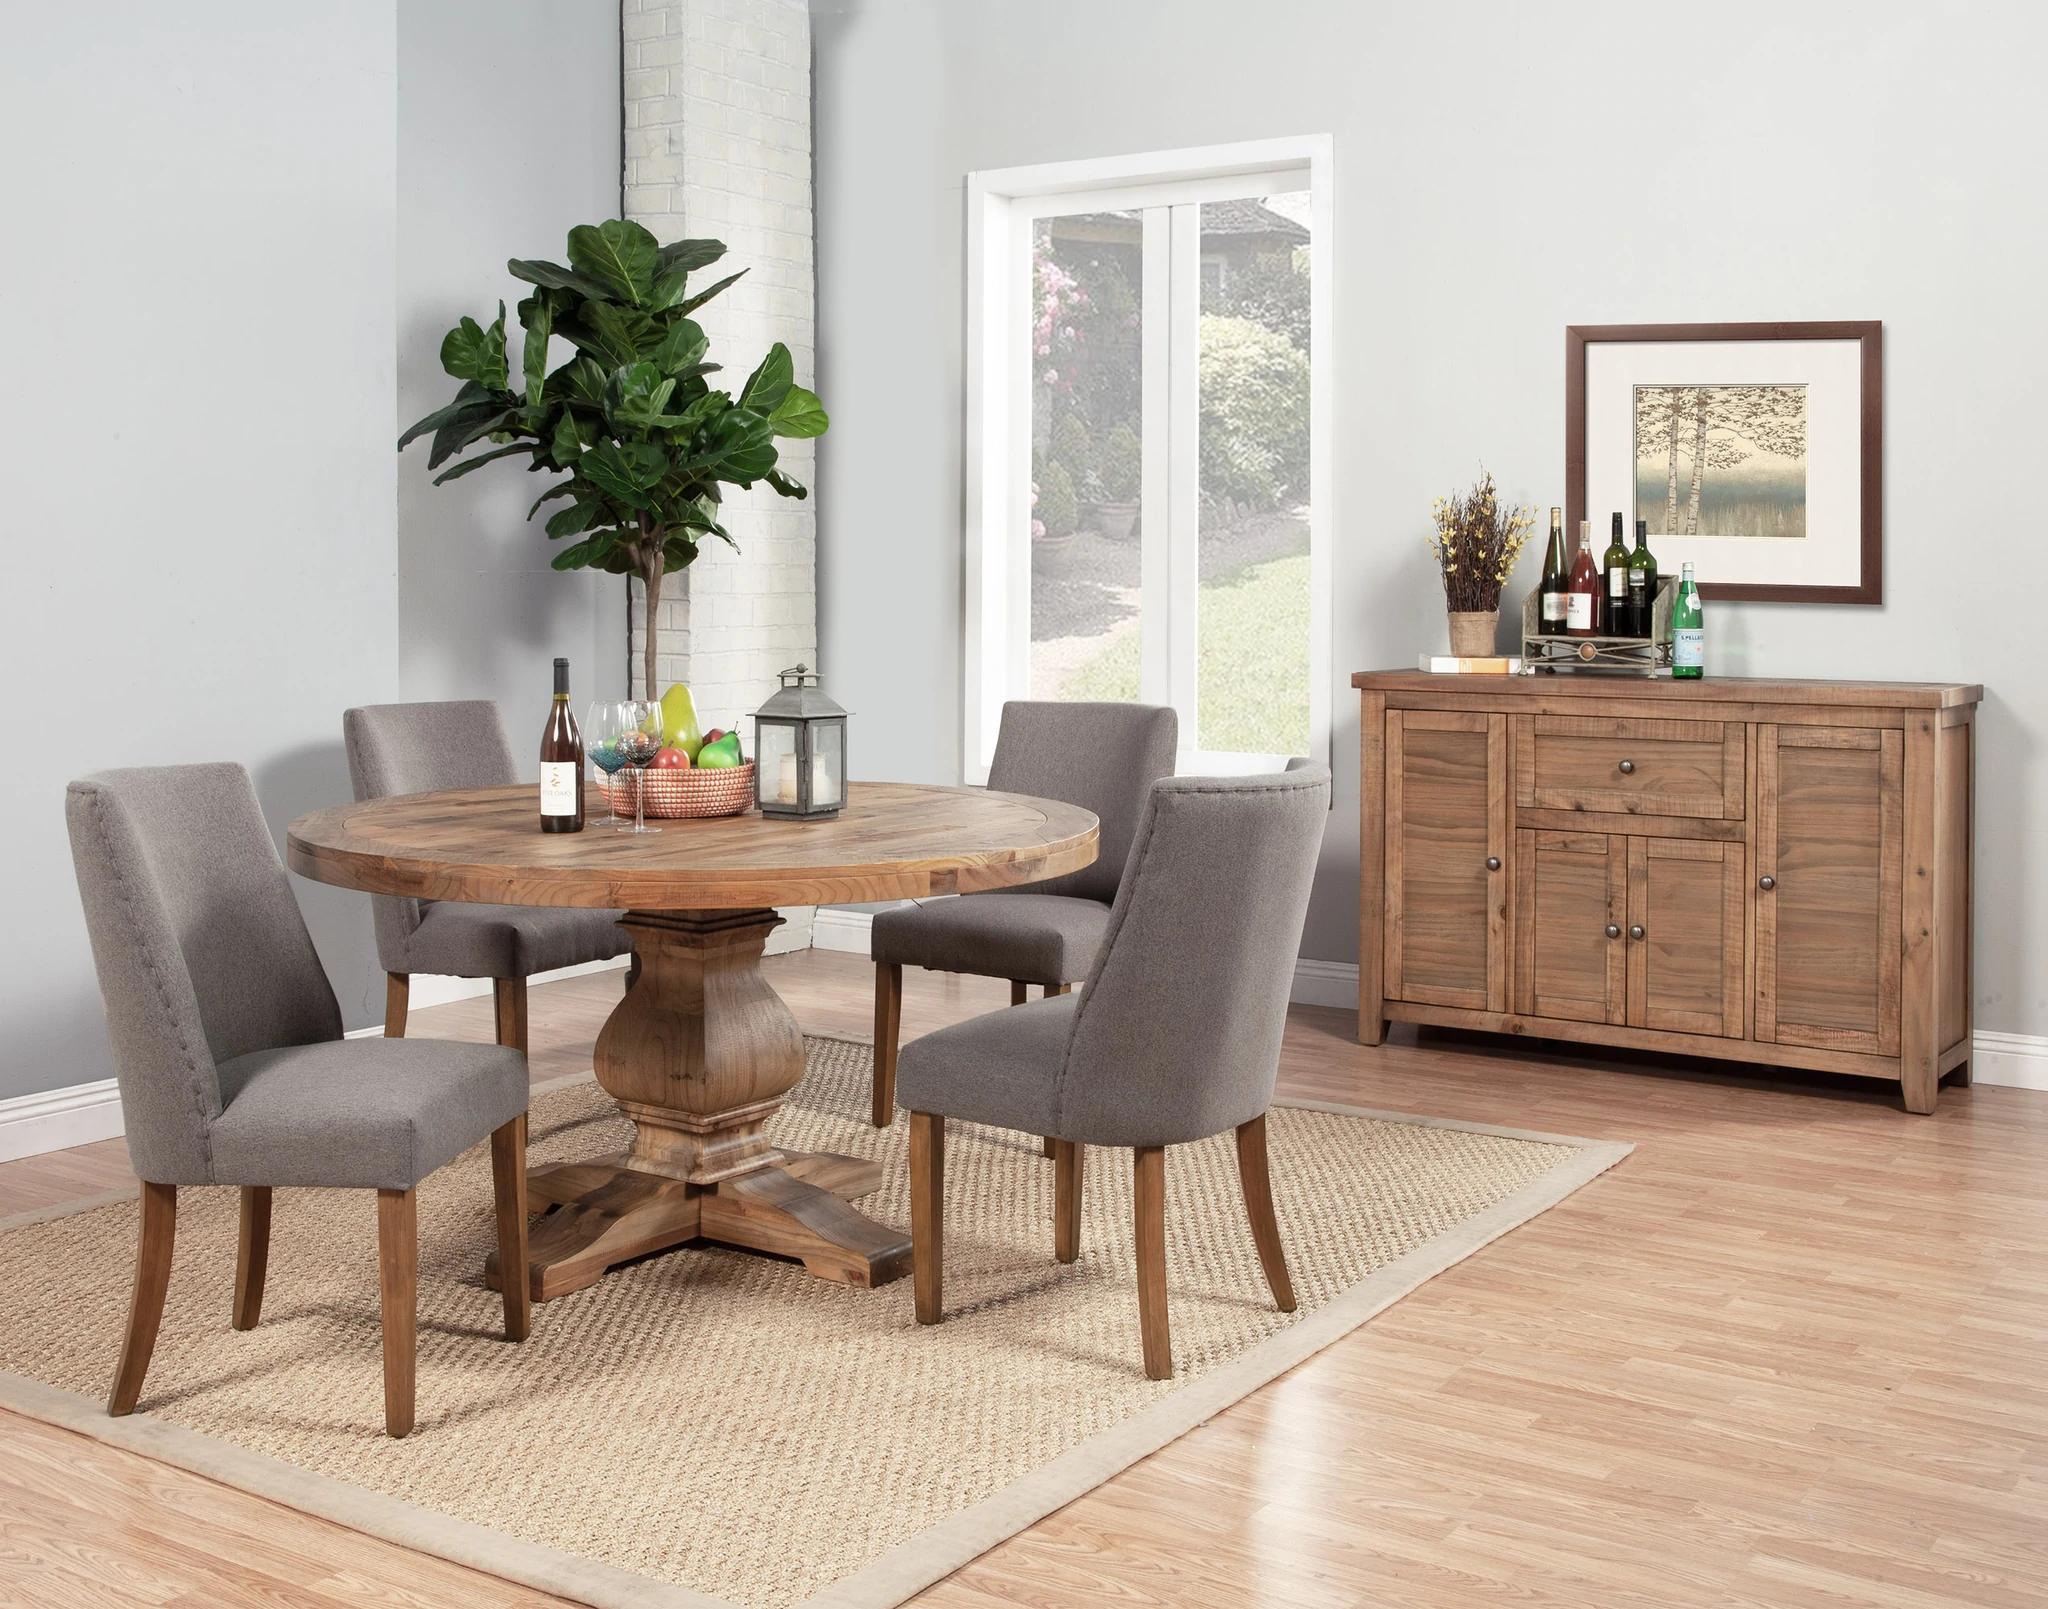 Contemporary, Rustic Dining Table Set KENSINGTON 2668-25-Set-6 in Natural, Gray Fabric